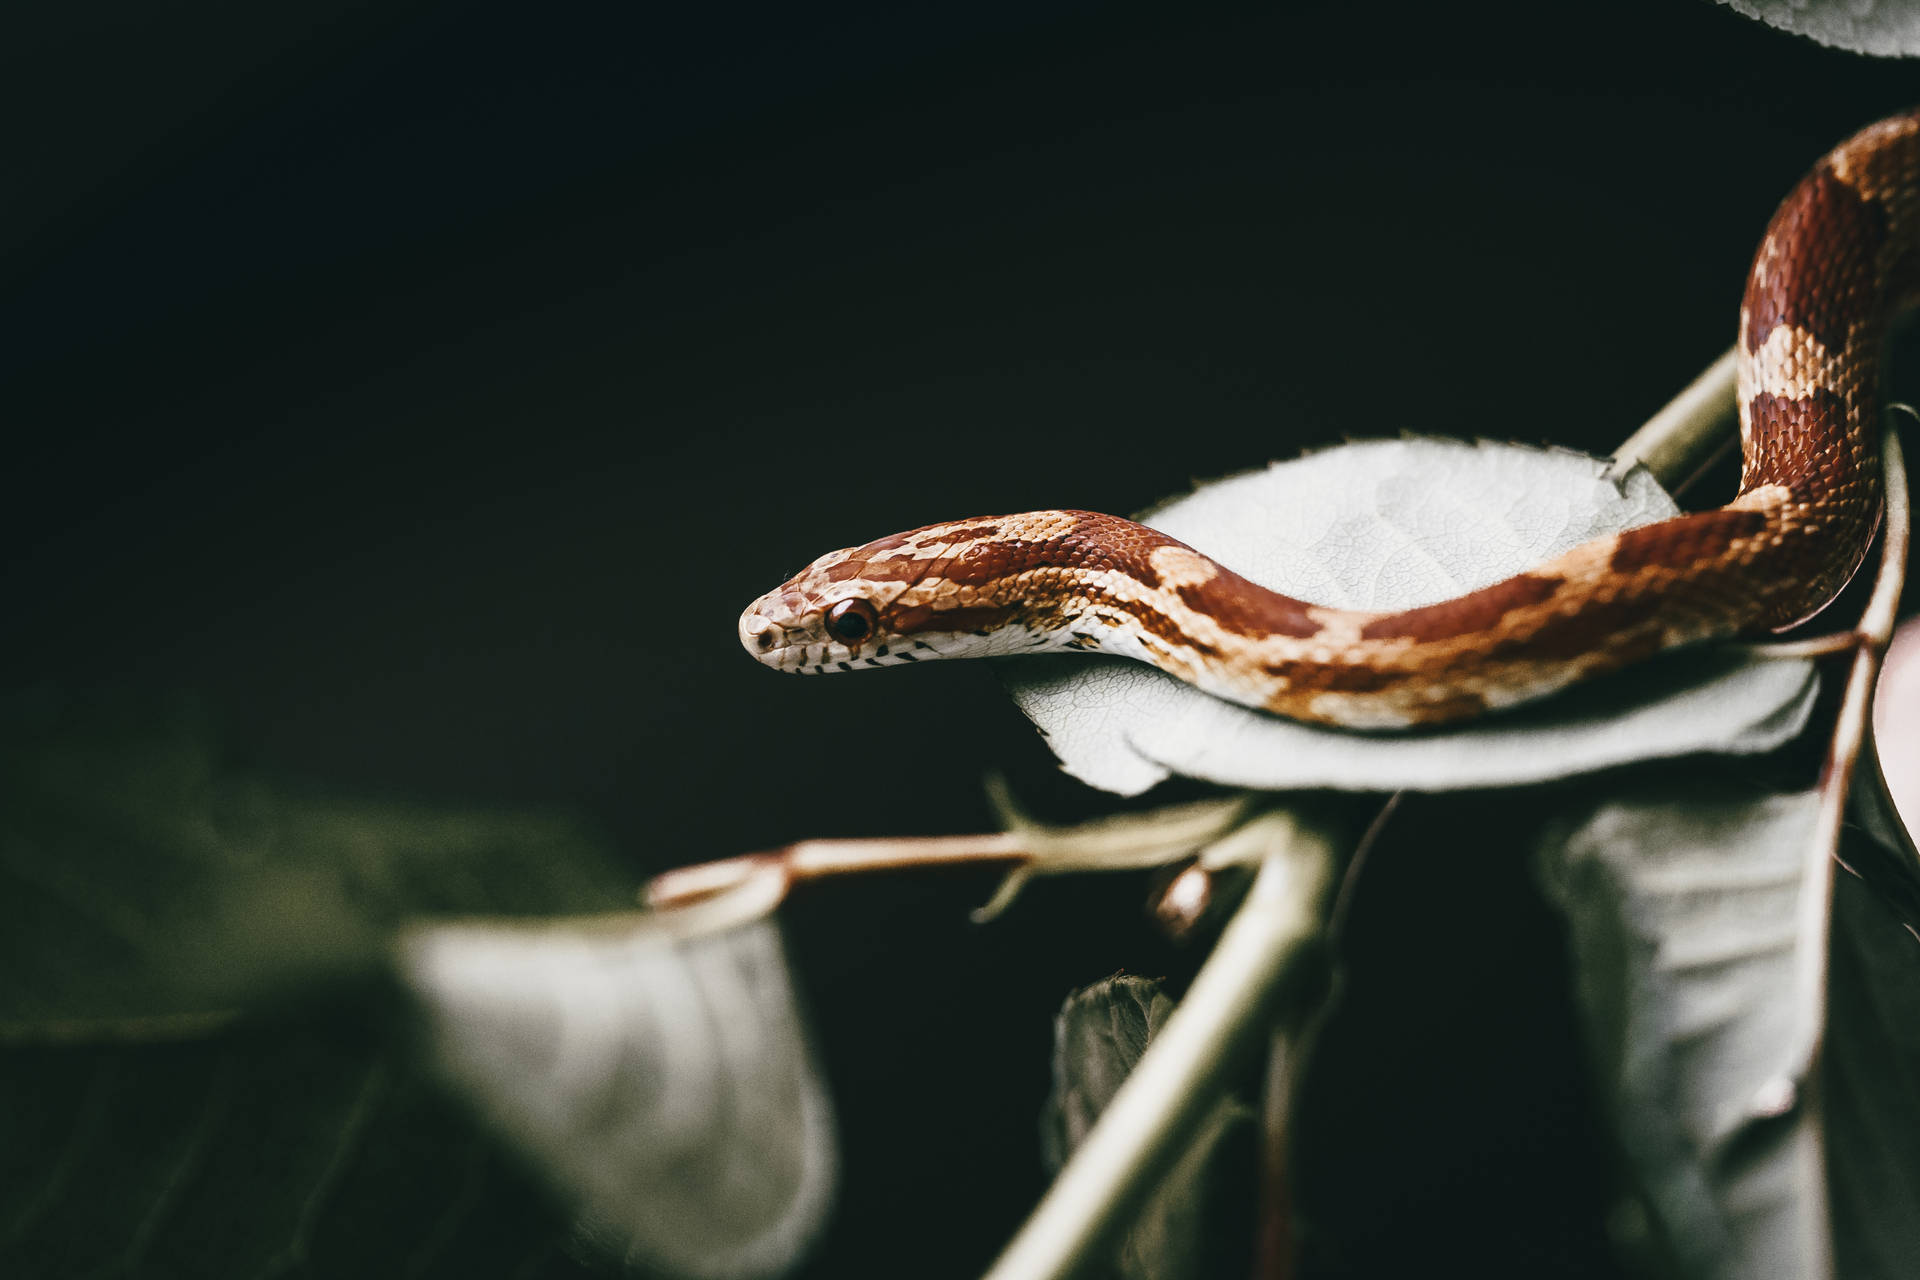 Small Wild Animal Snake On A Leaf Background